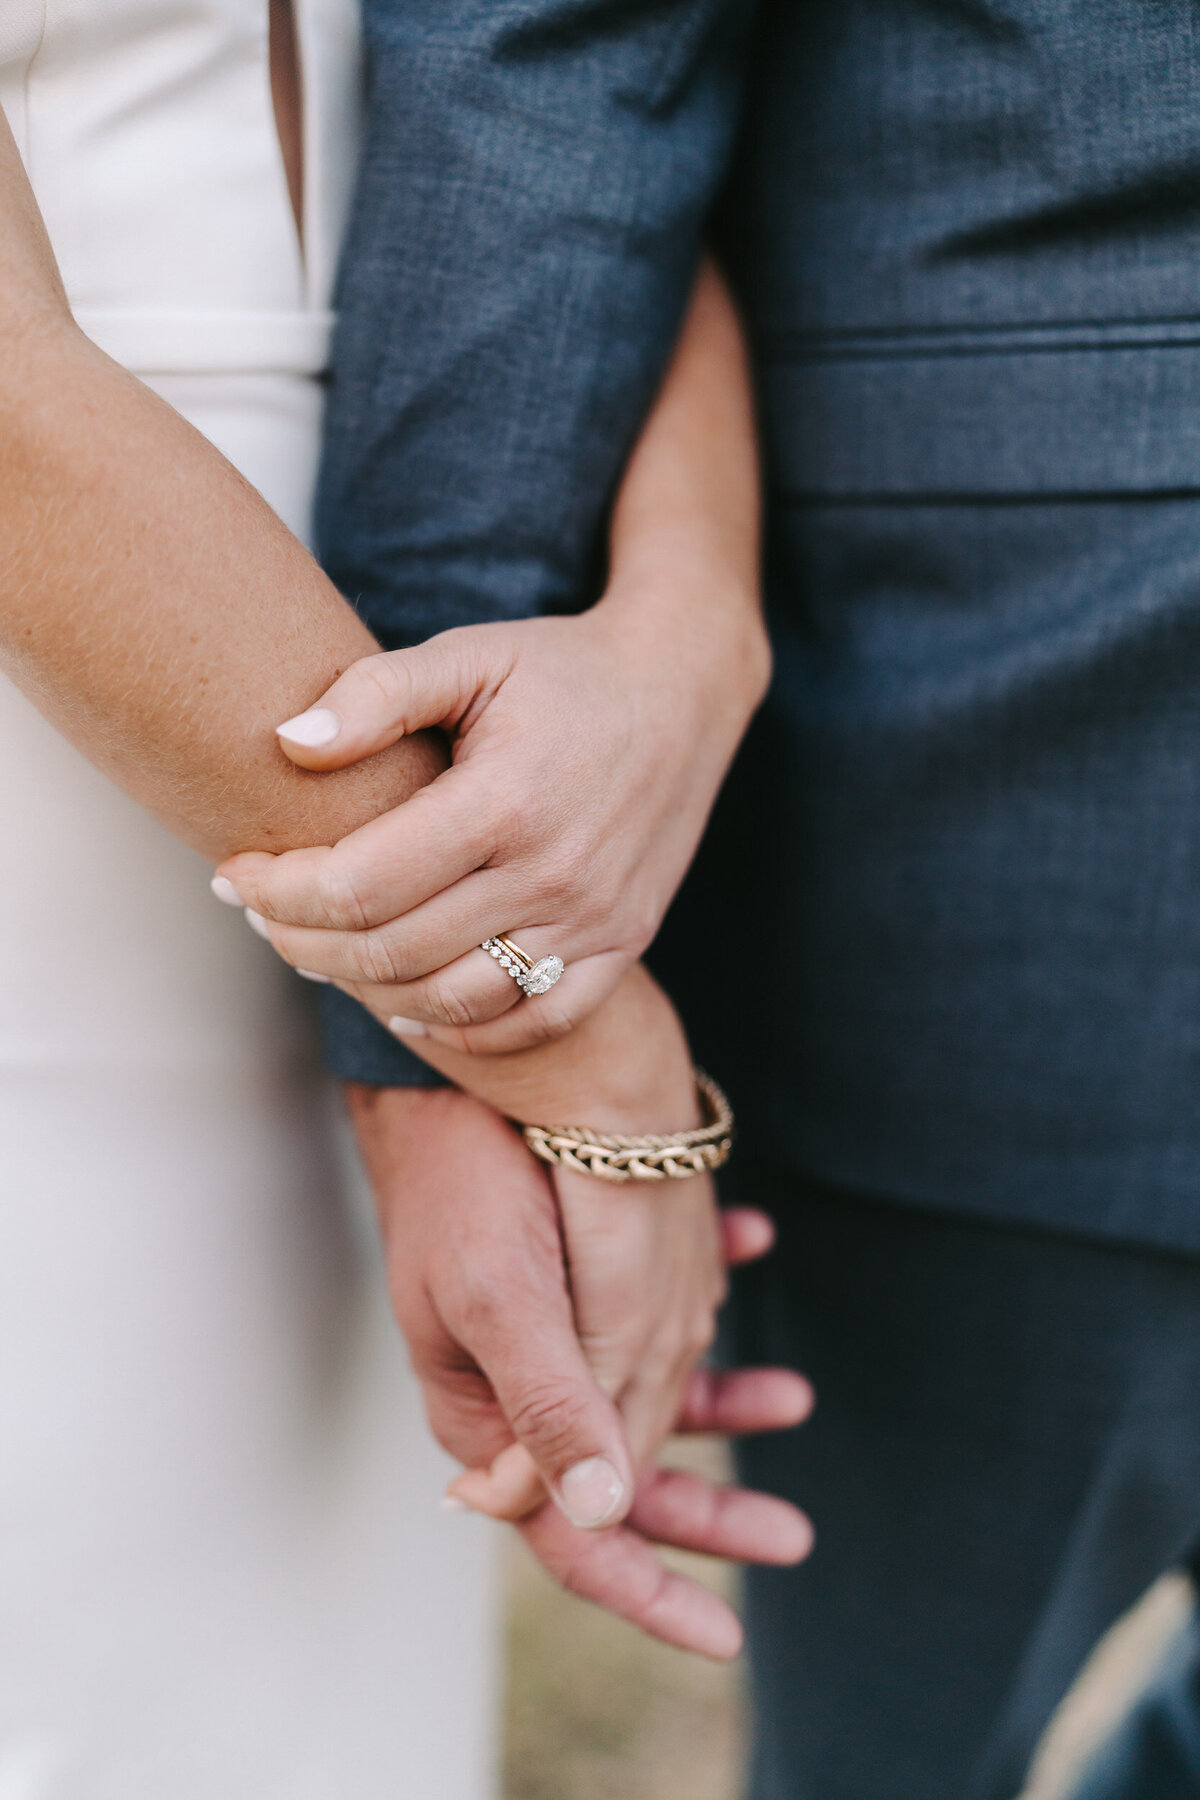 A colorful photograph of Carly and Bradley on their wedding day at Morgan Creek Barn in Dripping Springs, near Austin, Texas. The photo is a close-up of their clasped hands showing her wedding ring and wedding band along with her gold bracelet. Wedding photography taken by Stacie McChesney/Vitae Weddings.